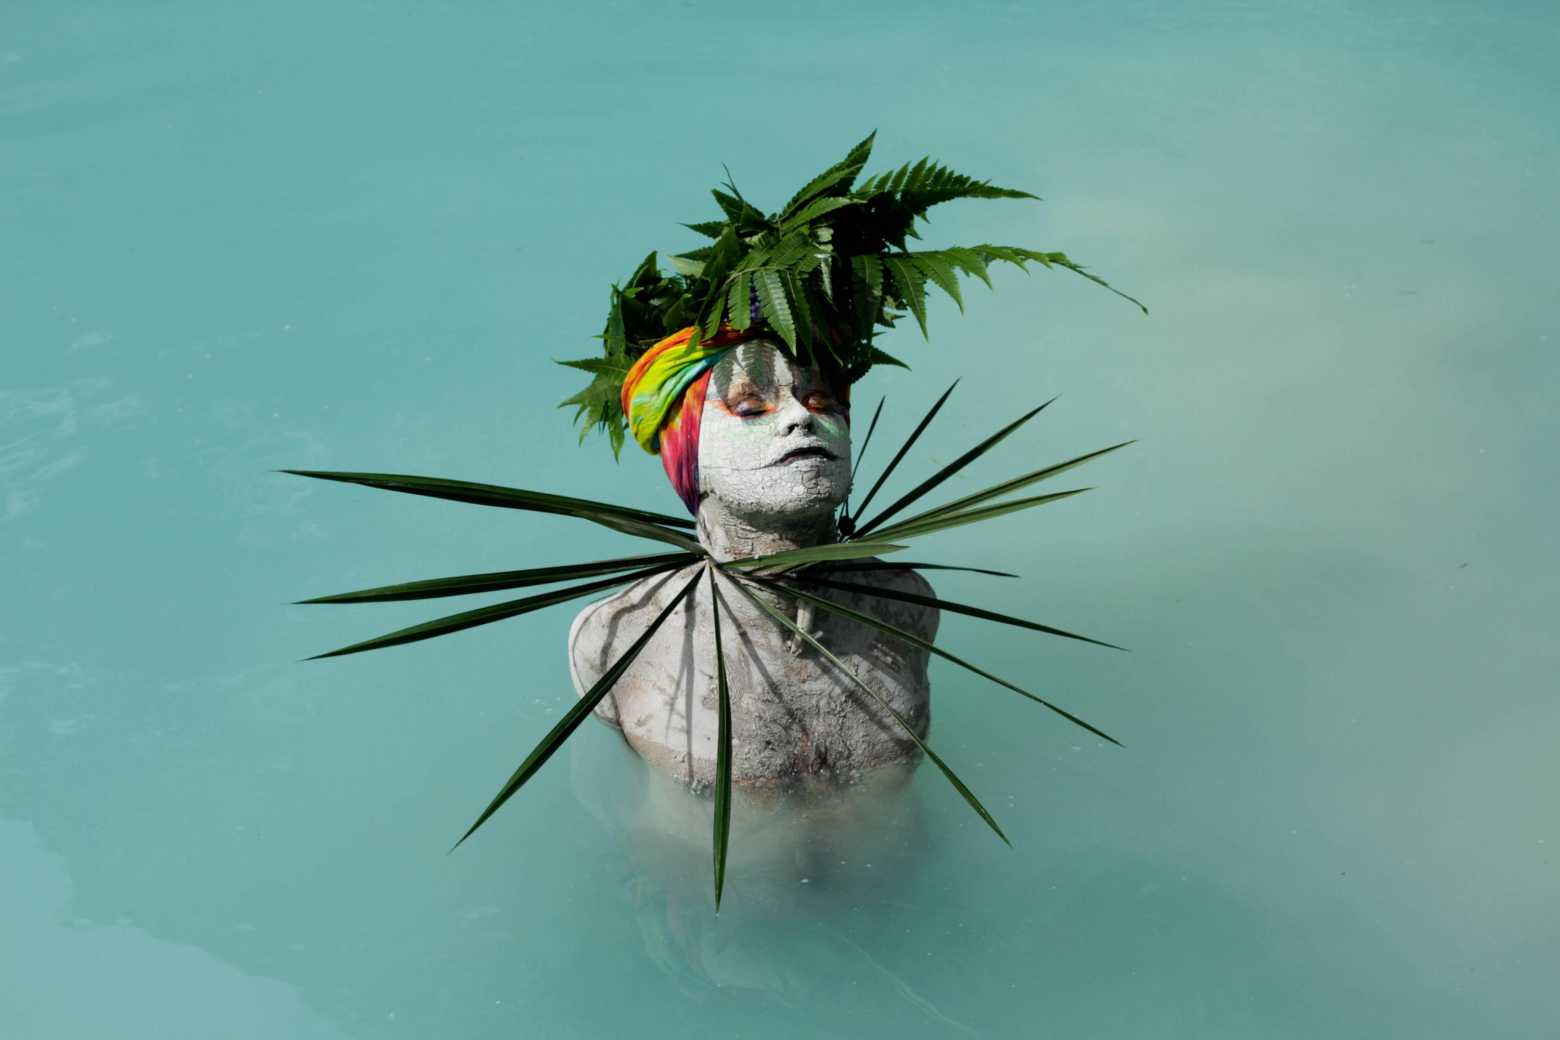 A photo of a person half submerged in a body of water with their eyes closed and skin painted white wearing head and neck pieces made of green foliage and a tie-dye head covering.